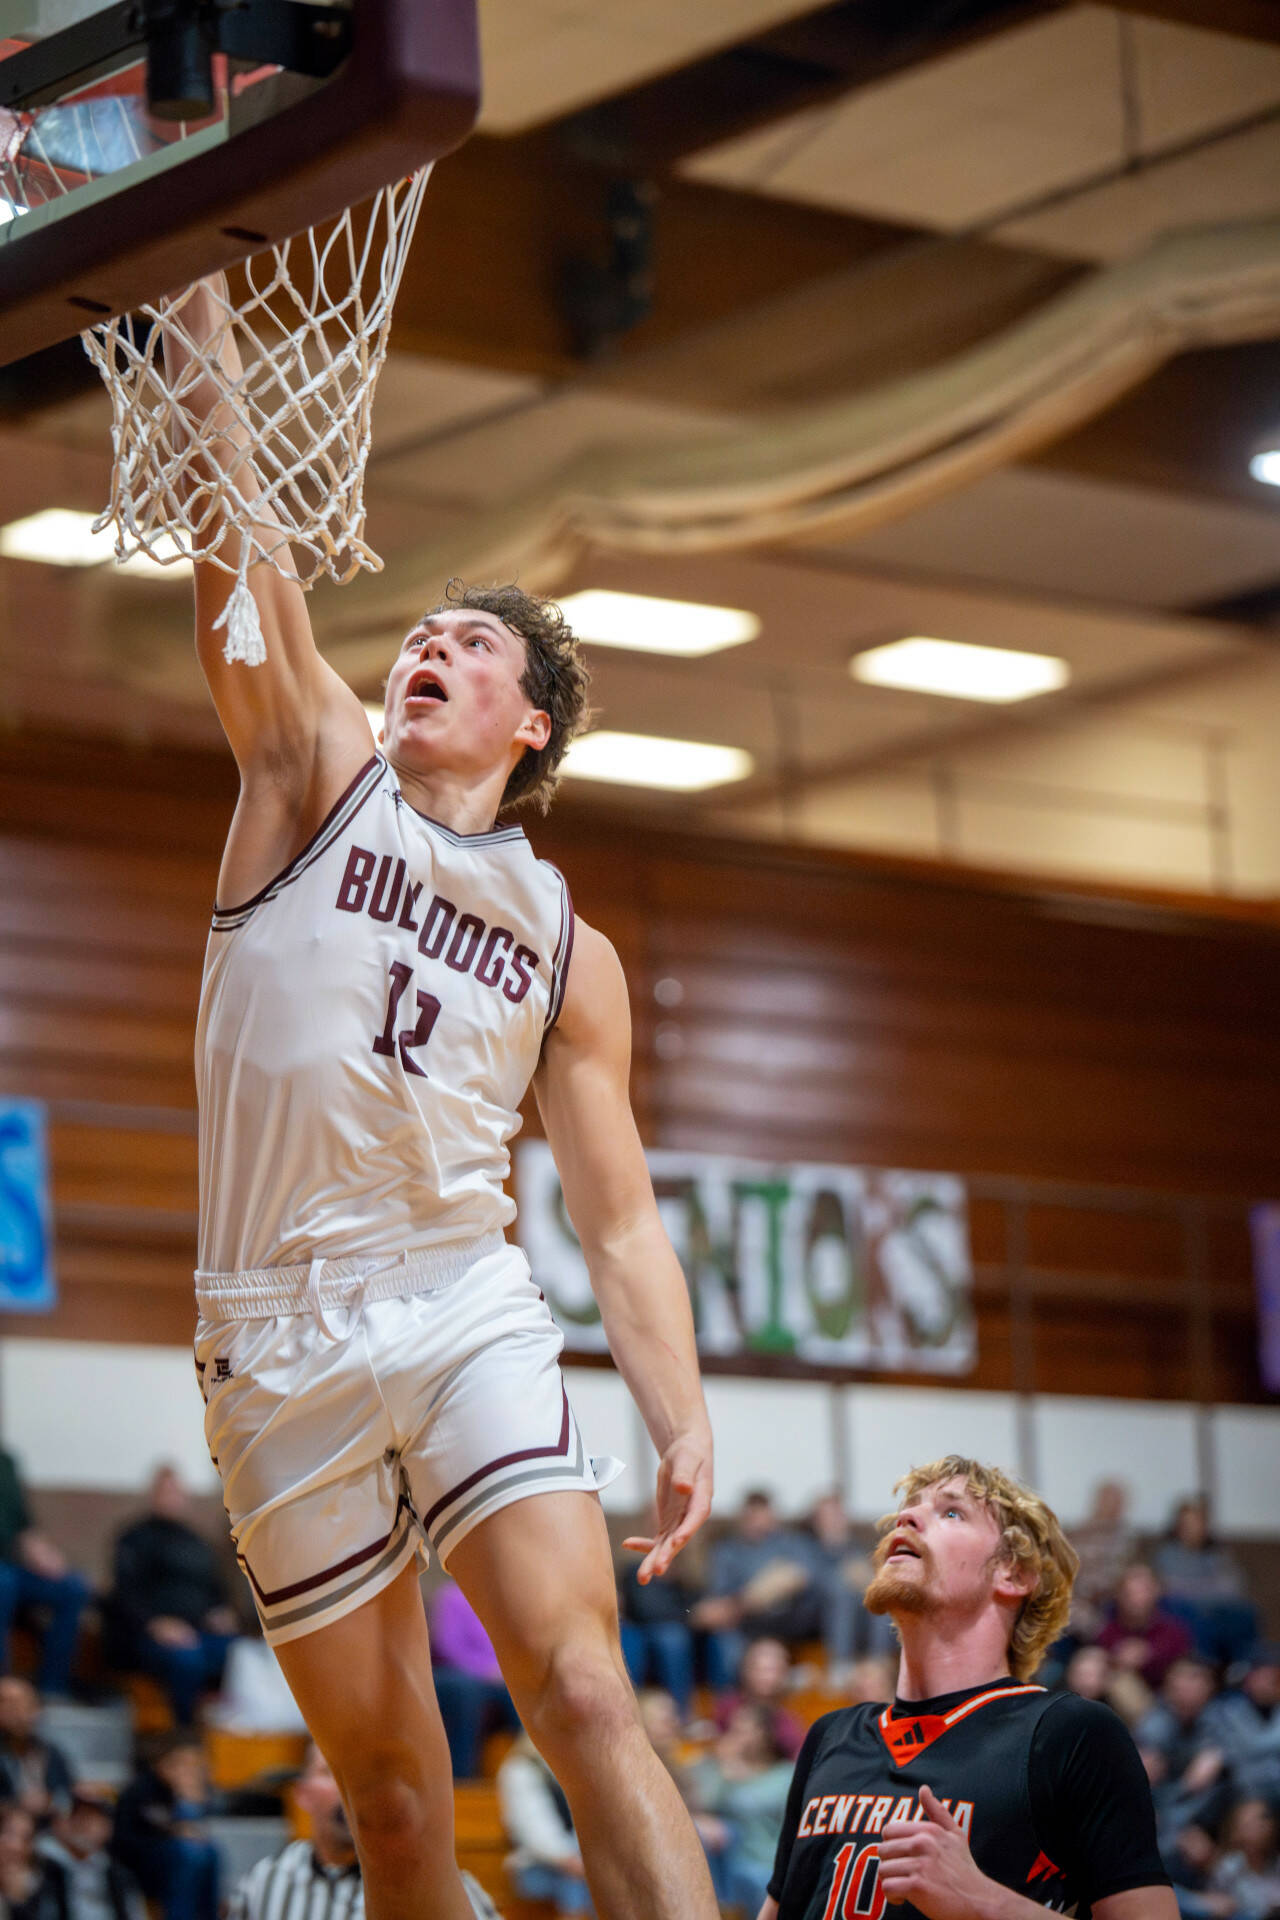 PHOTO BY FOREST WORGUM Montesano senior foward Gabe Bodwell (12) dunks for two of his 10 points in a 69-43 victory over Centralia on Tuesday in Montesano.